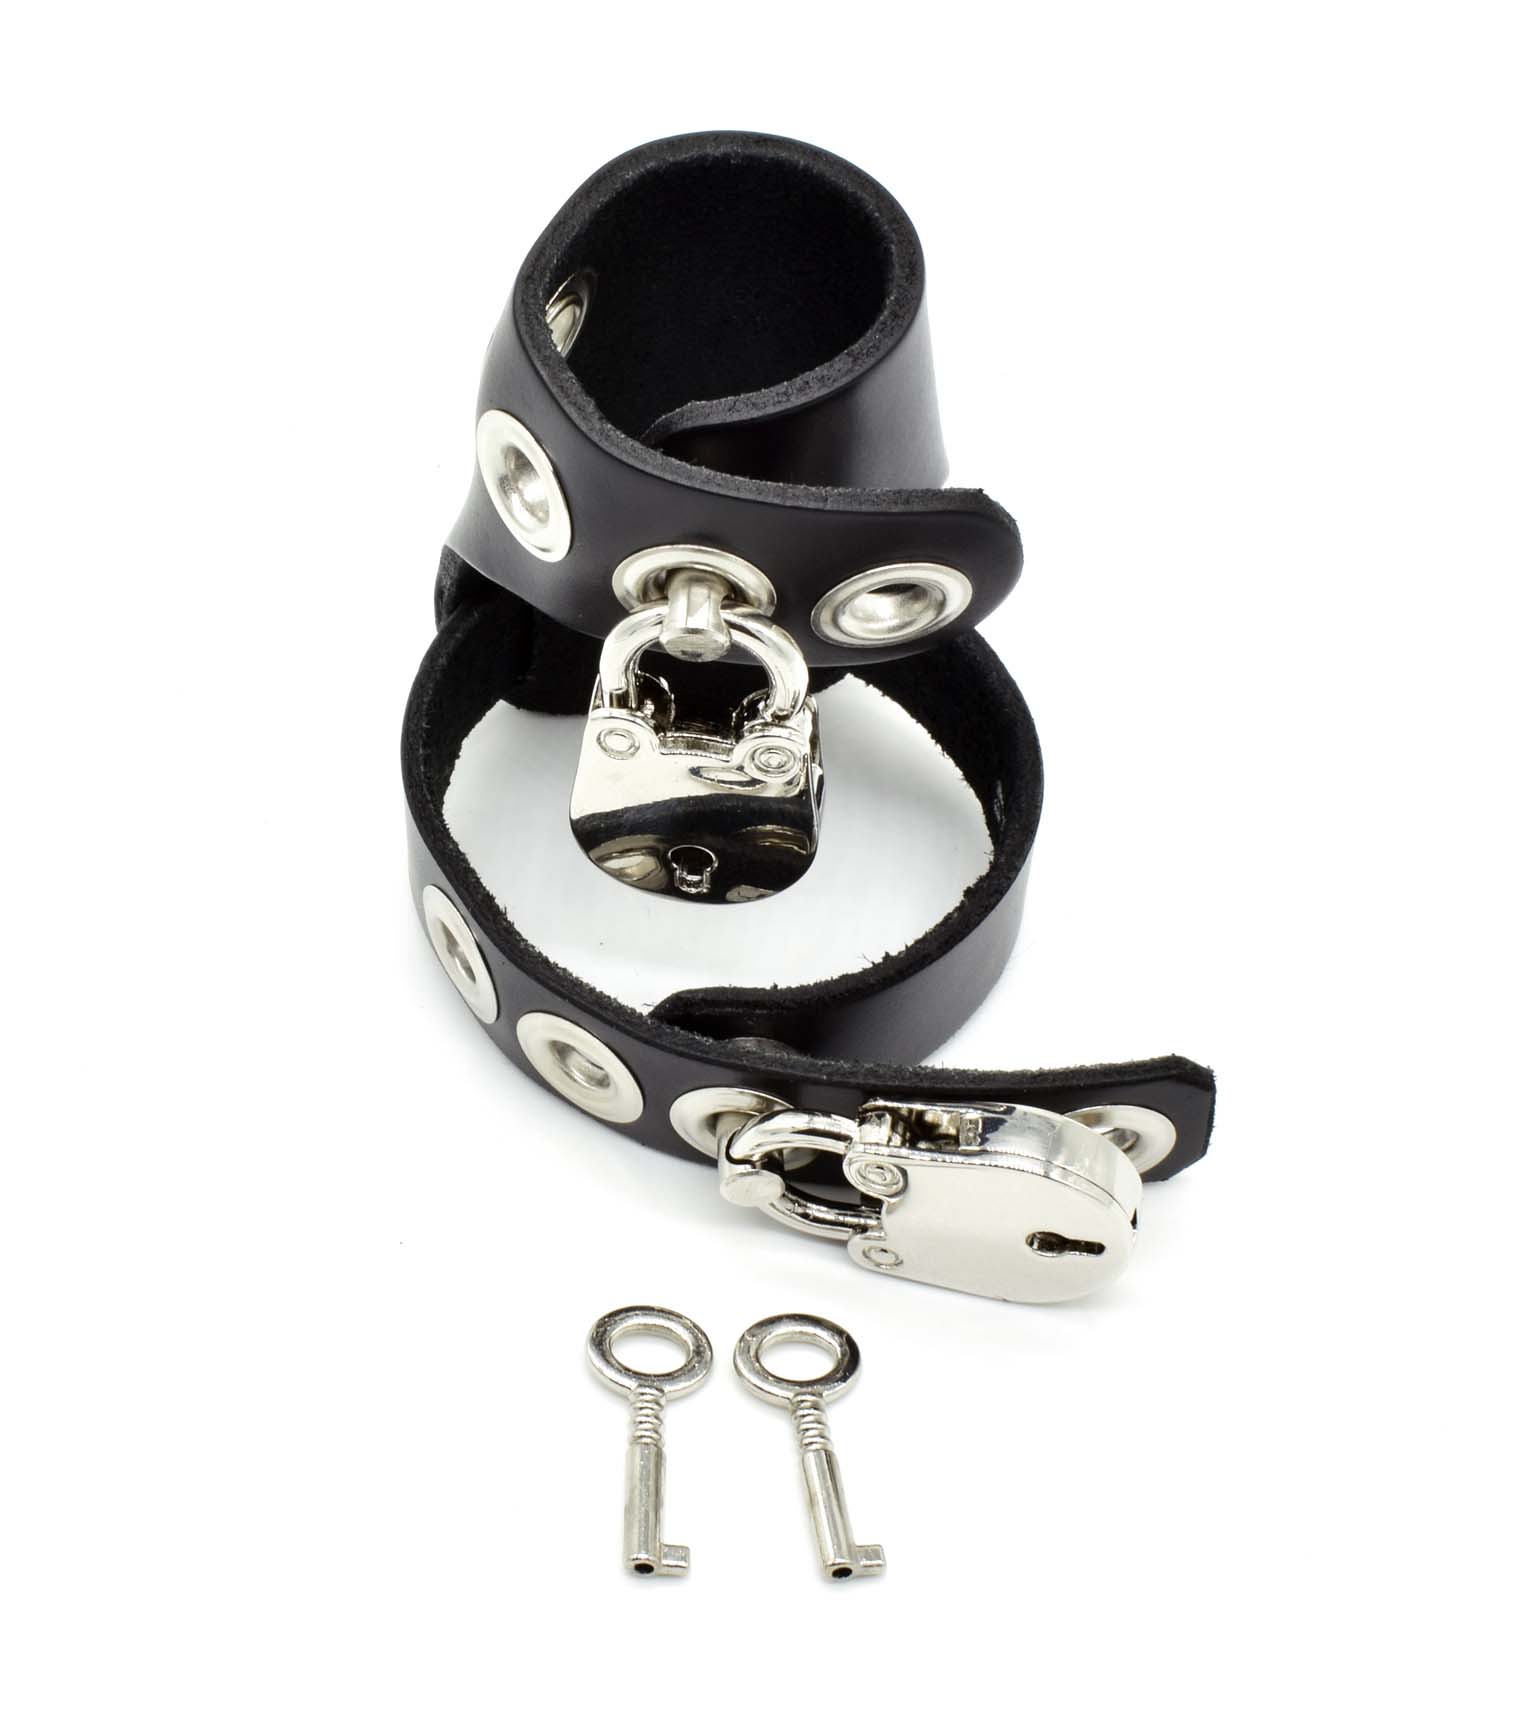 The Cock Lock Latigo Chastity Cage in the closed position with two locks and a set of two keys standing on its end, underside view.